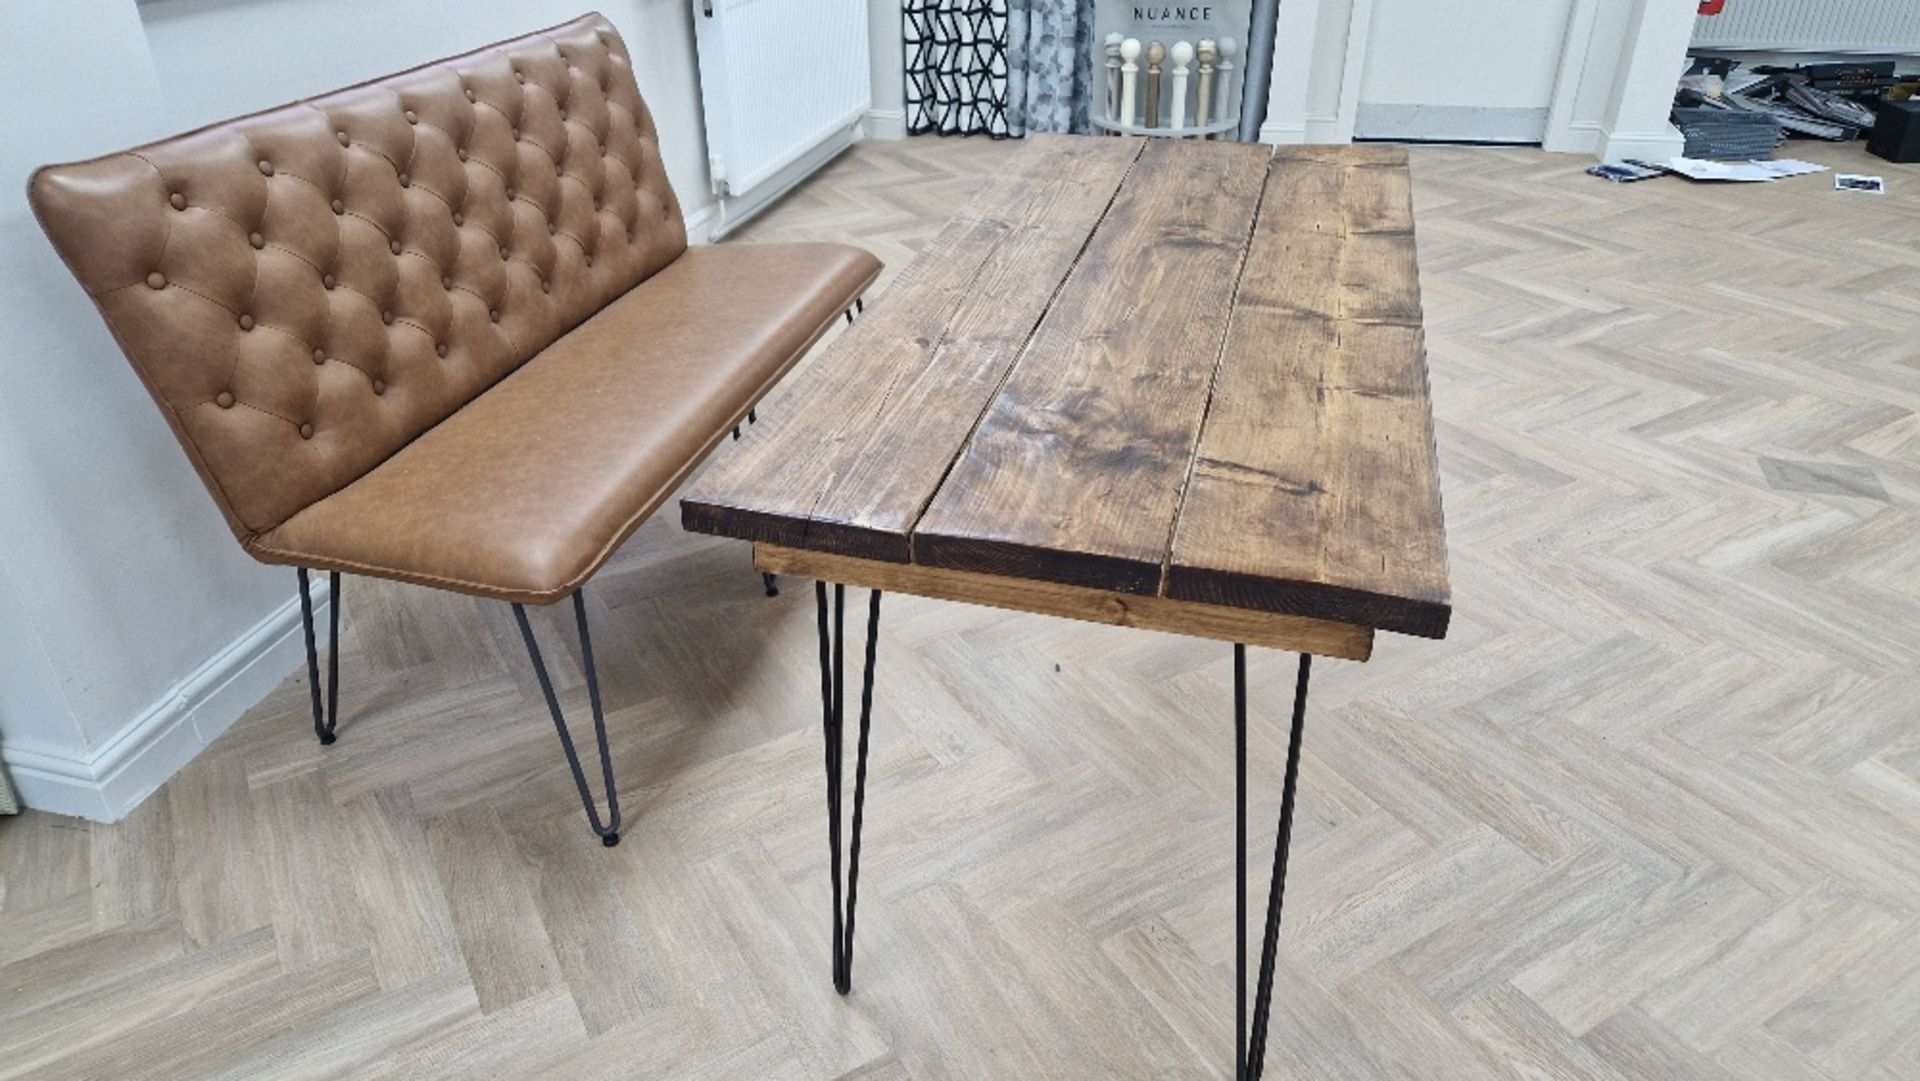 A CONTEMPORARY INDUSTRIAL STYLE DINING TABLE WITH HAIRPIN LEGS IN DARK WOOD WITH BOTTOMBACK